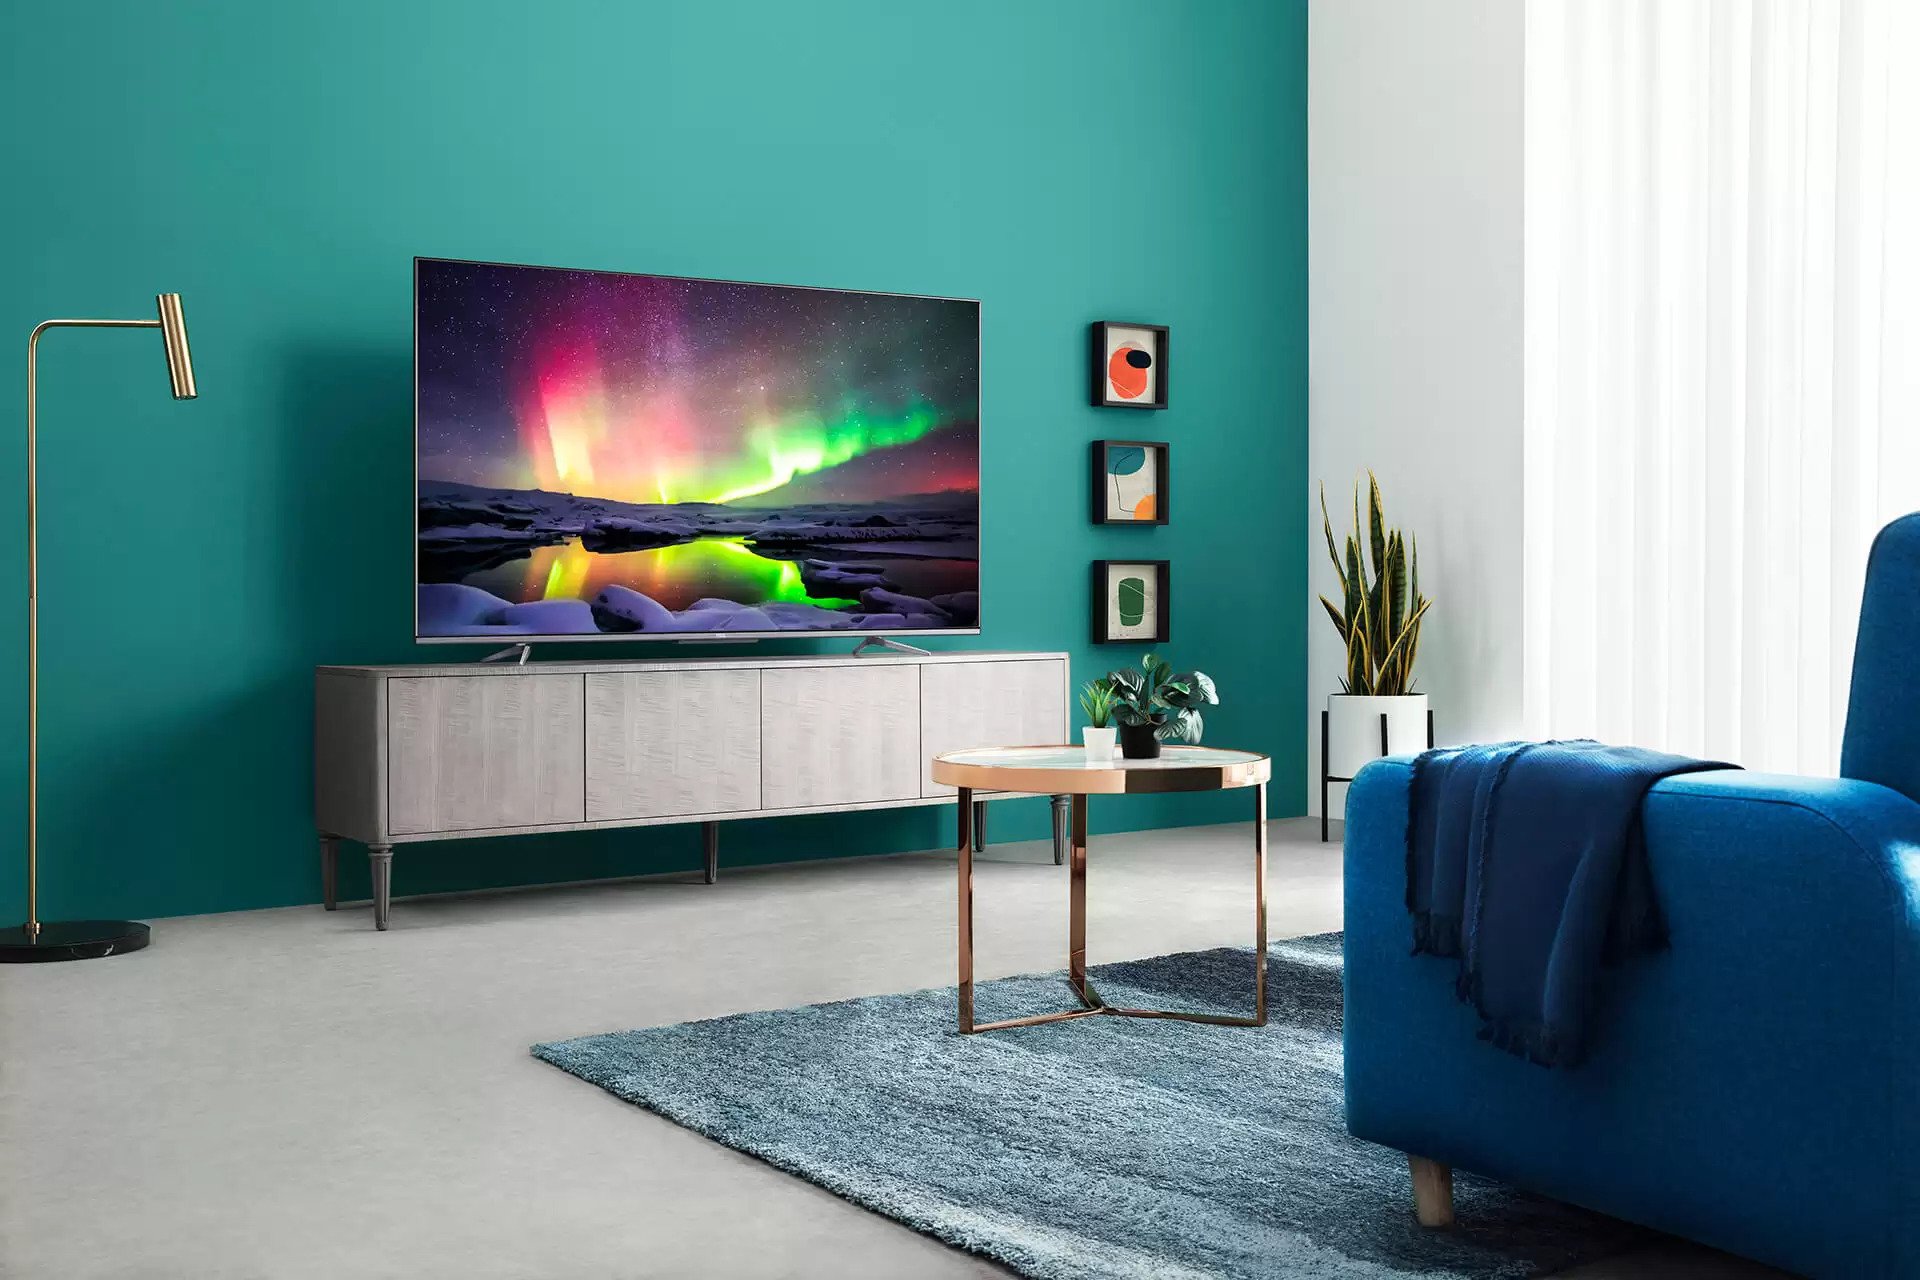 TCL P725 Series 4K HDR TV Featured TCL P725 Series 4K HDR smart TV